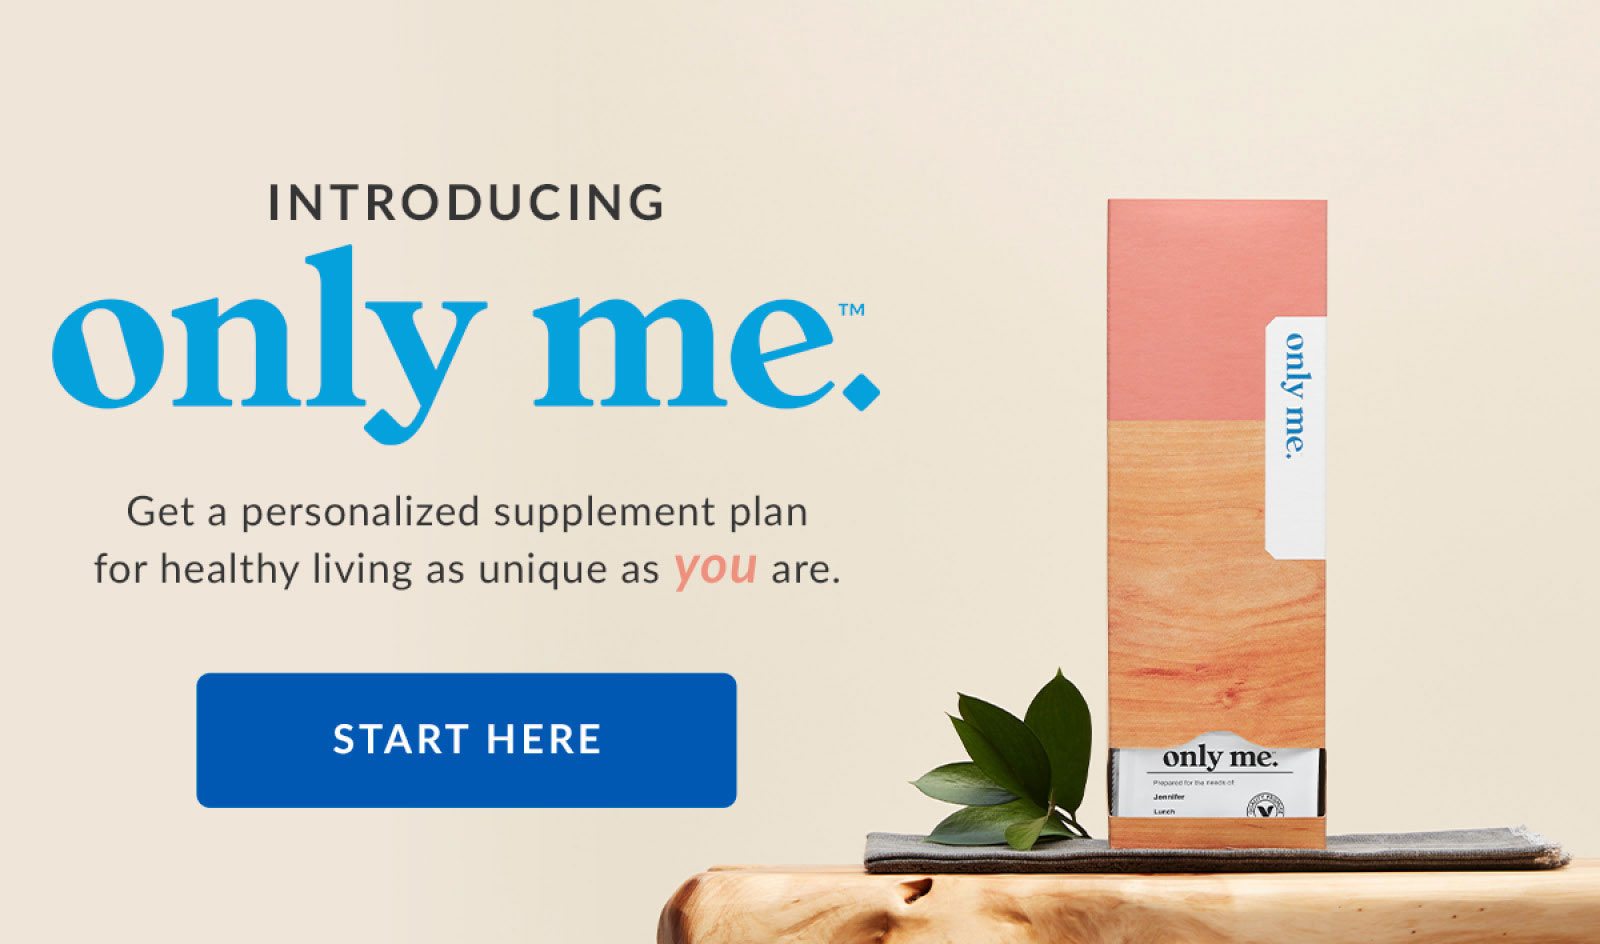 INTRODUCING only me. | Get a personalized supplement plan for healthy living as unique as you are. | START HERE